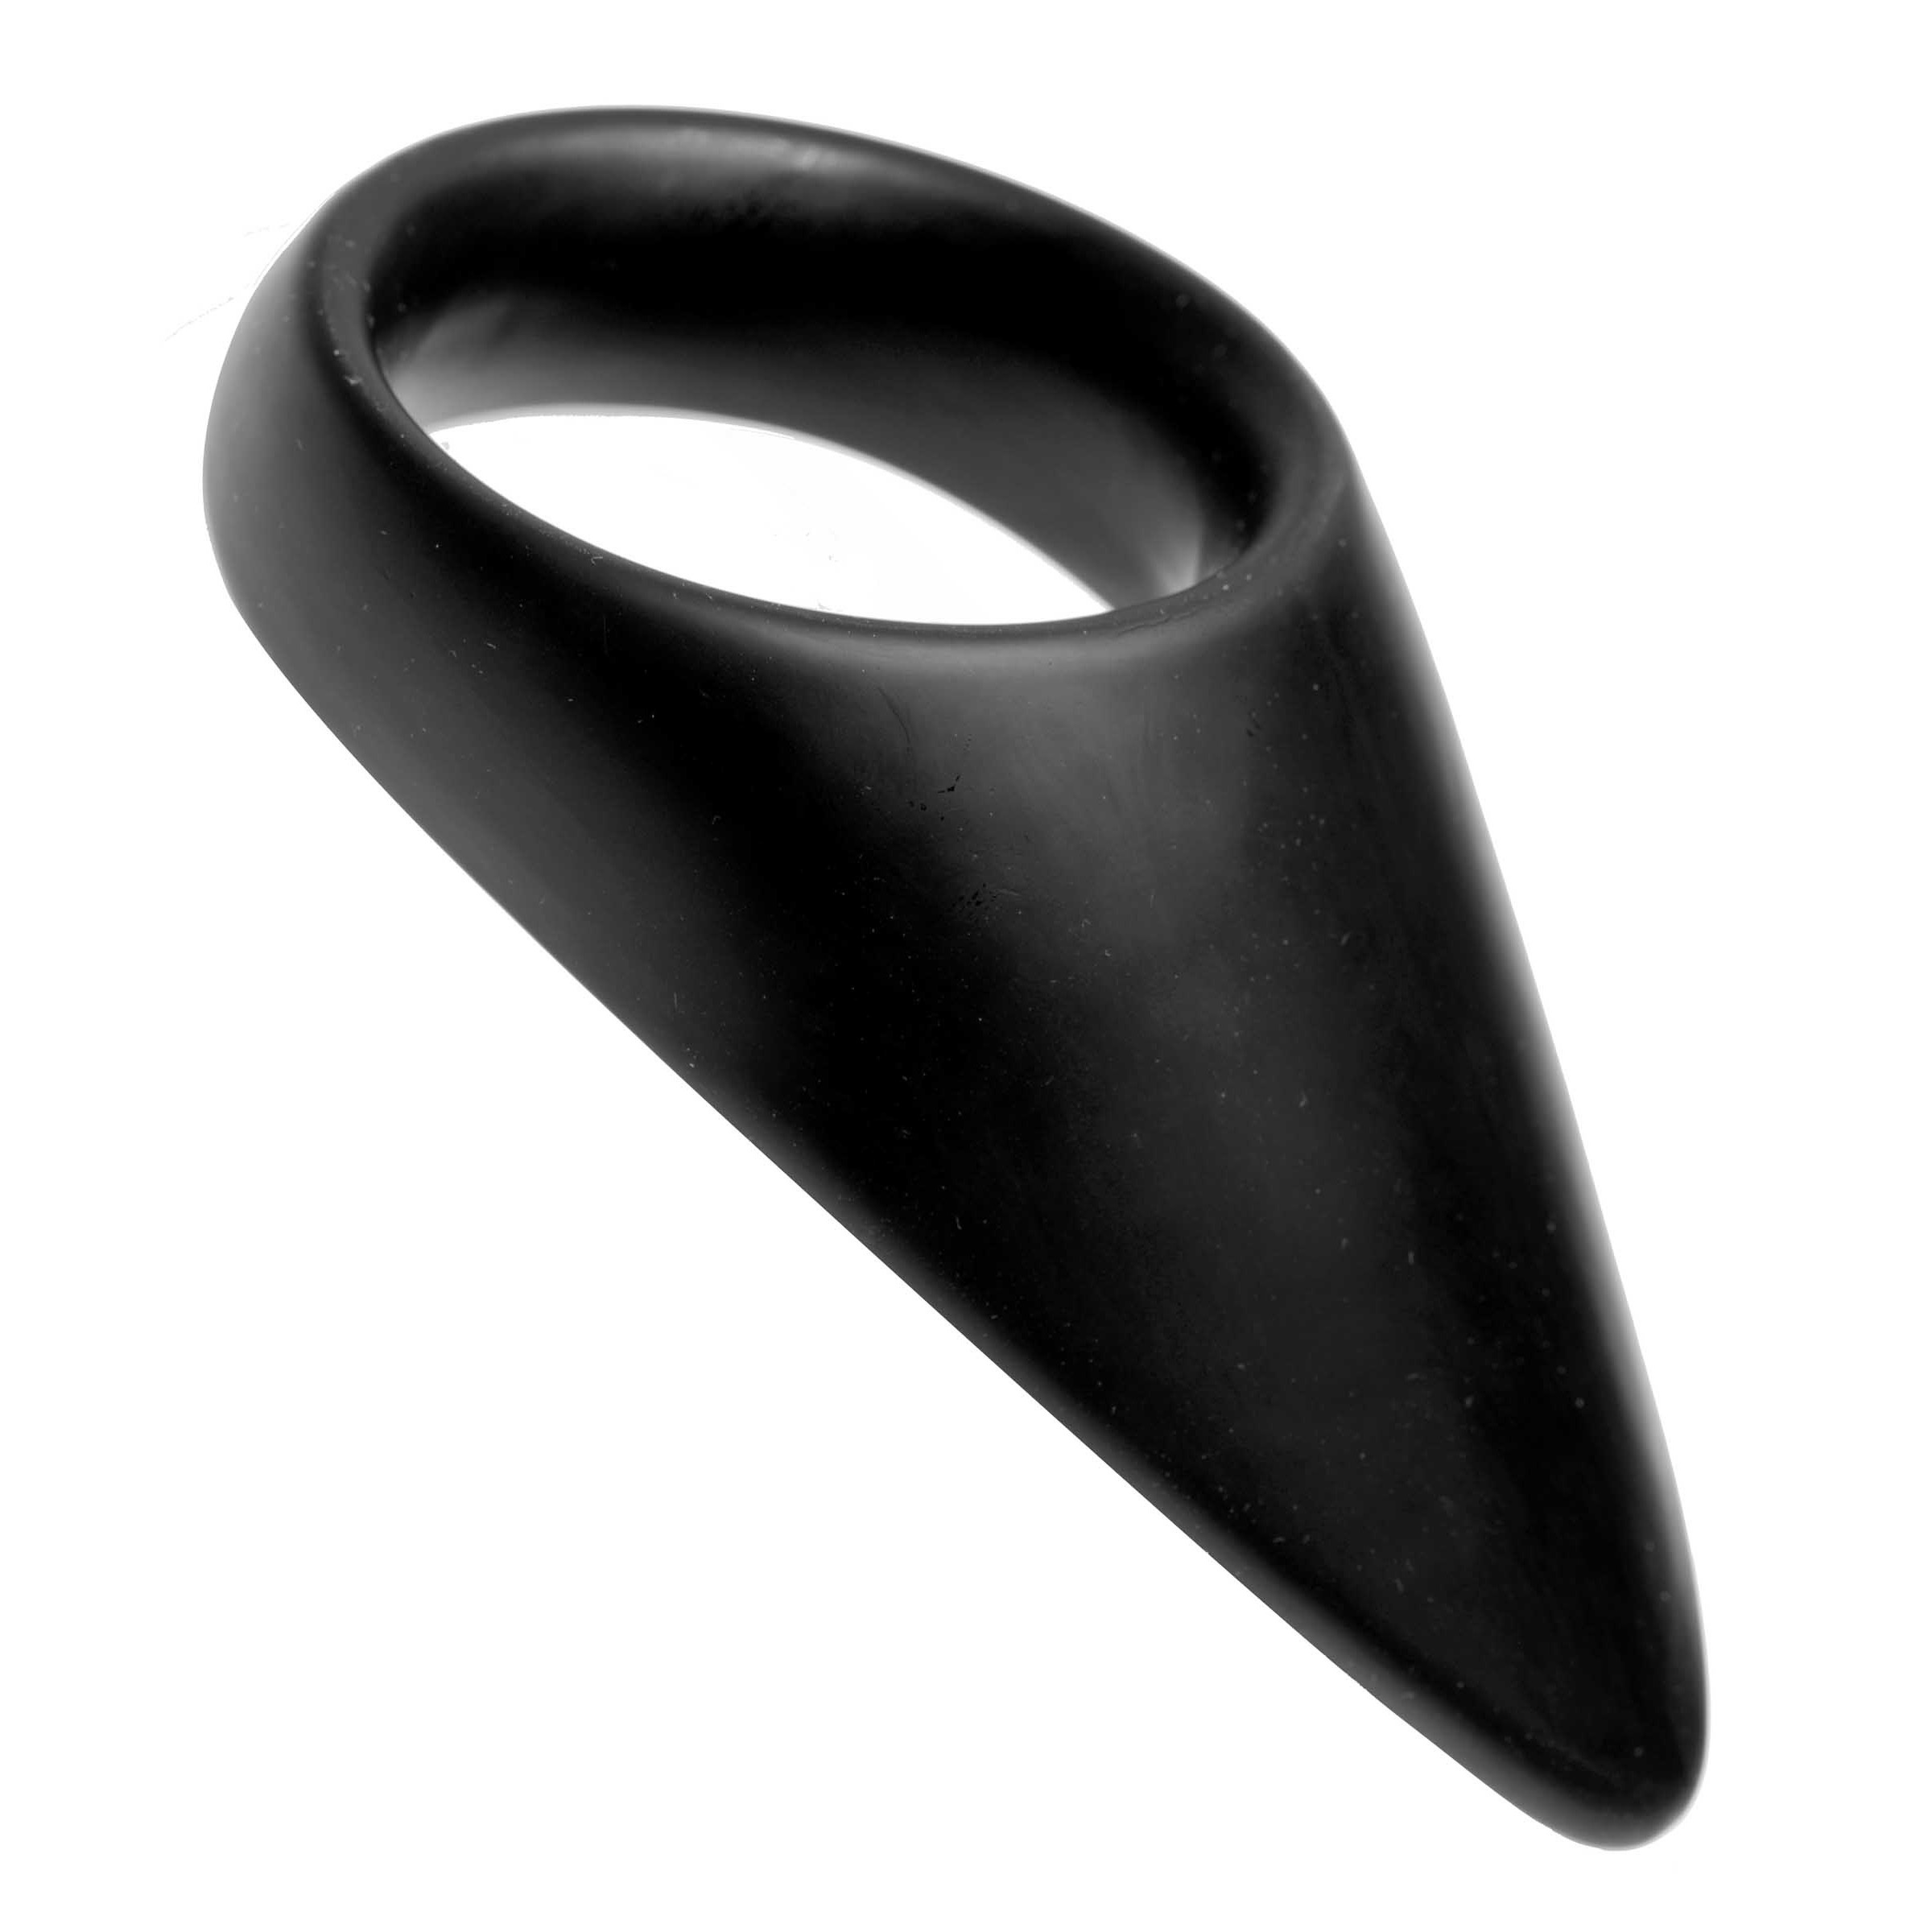 Taint Teaser Silicone Cock Ring and Taint Stimulator – 1.75 Inch